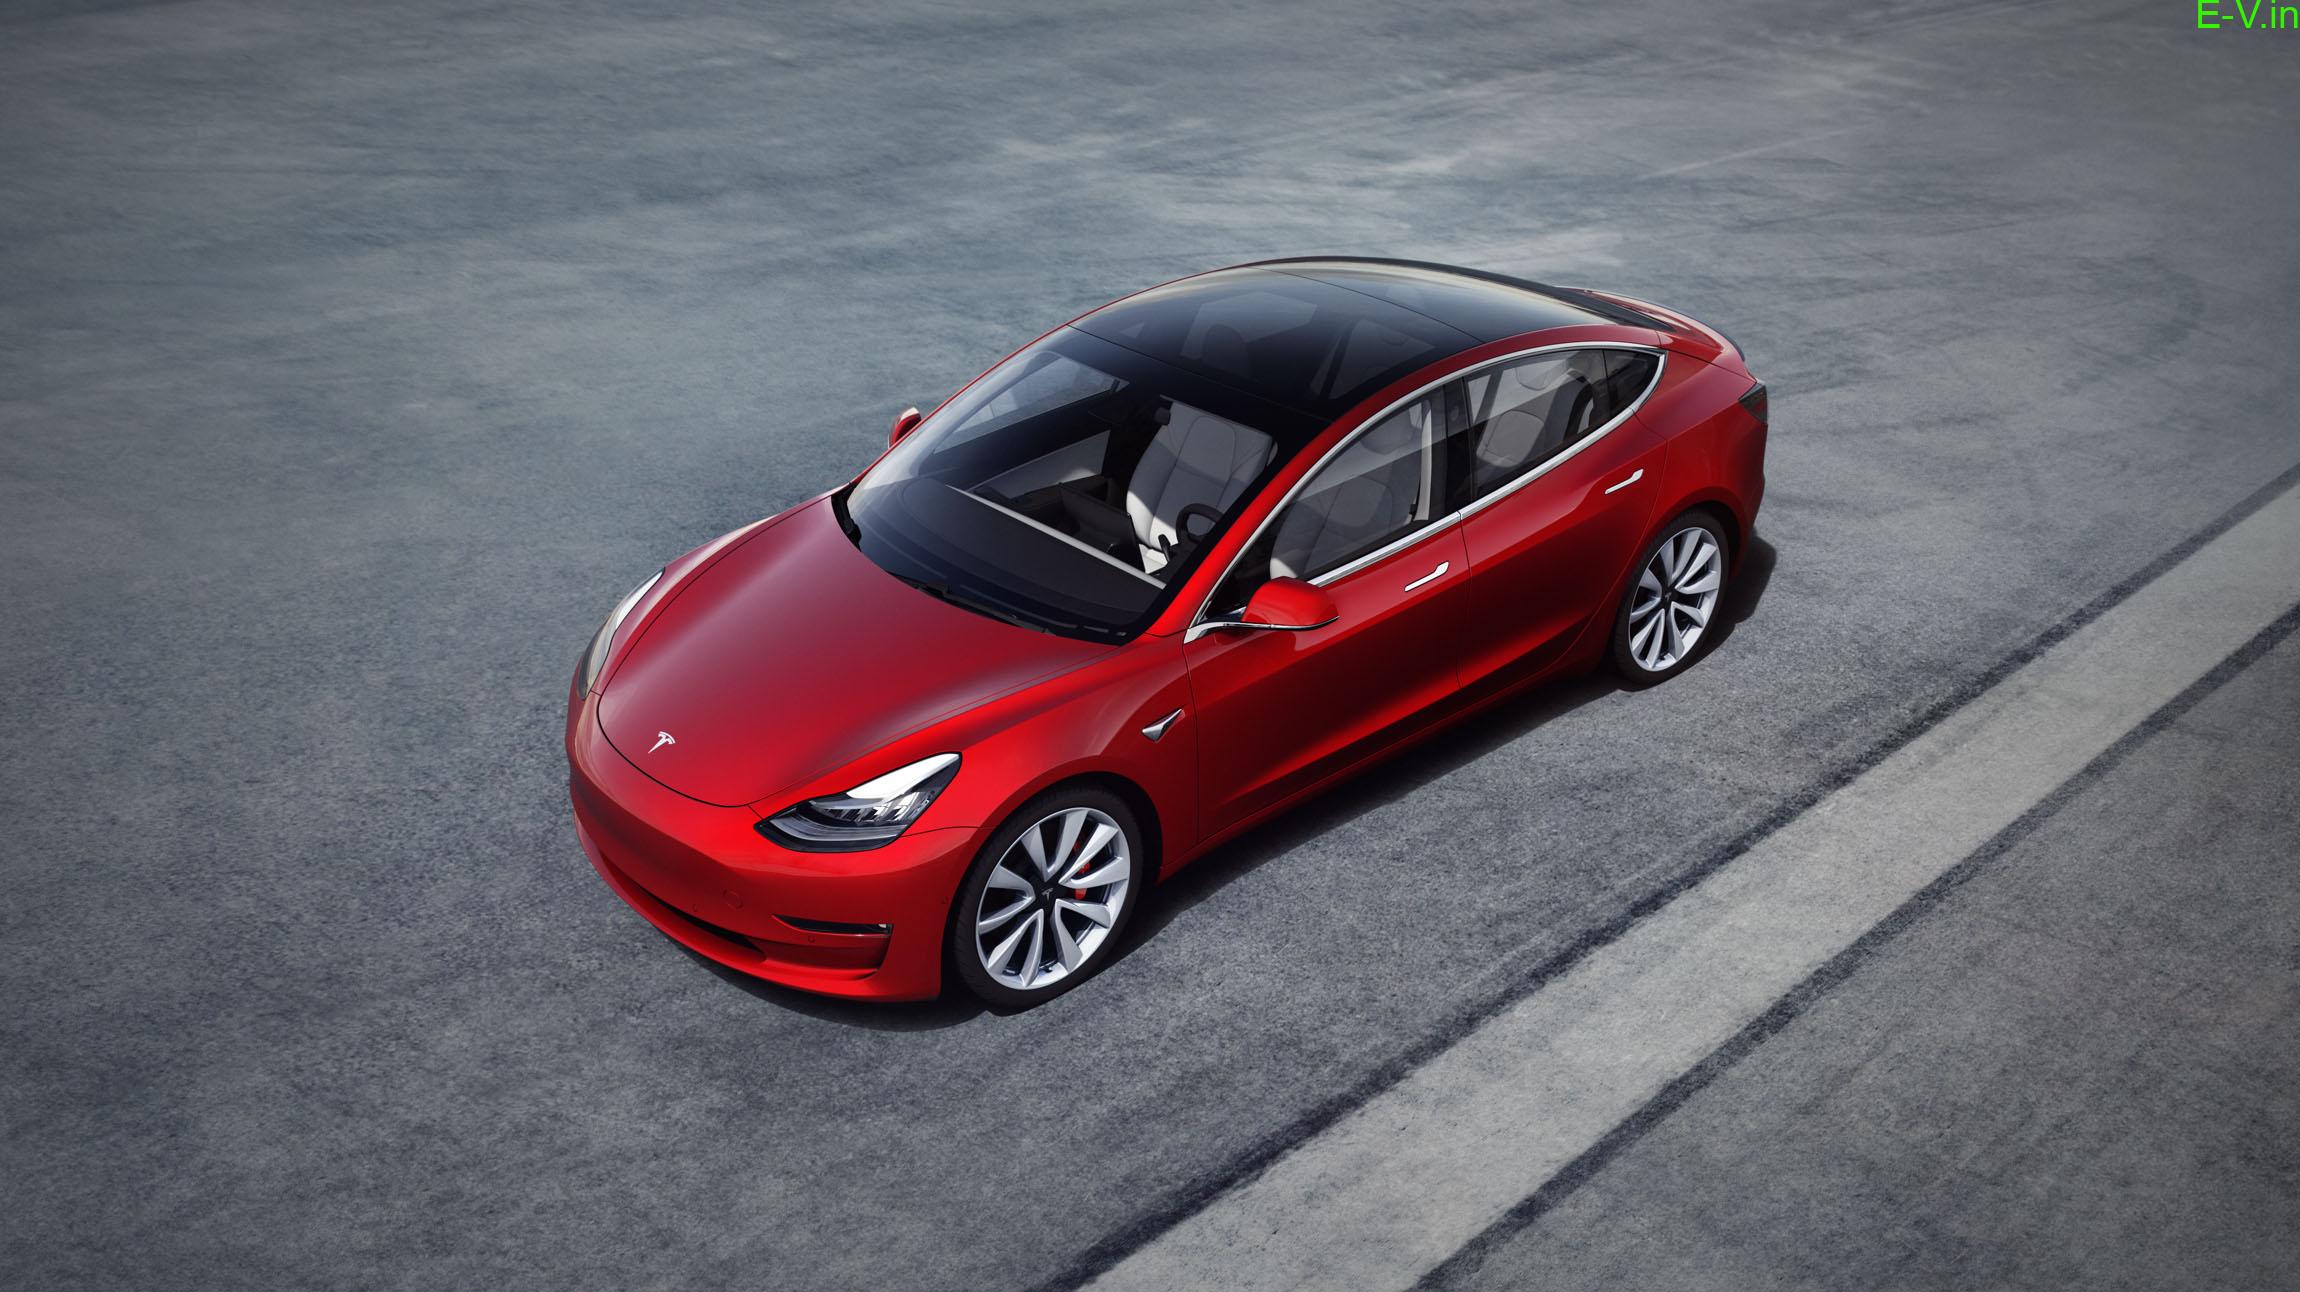 Will Tesla gets success in India